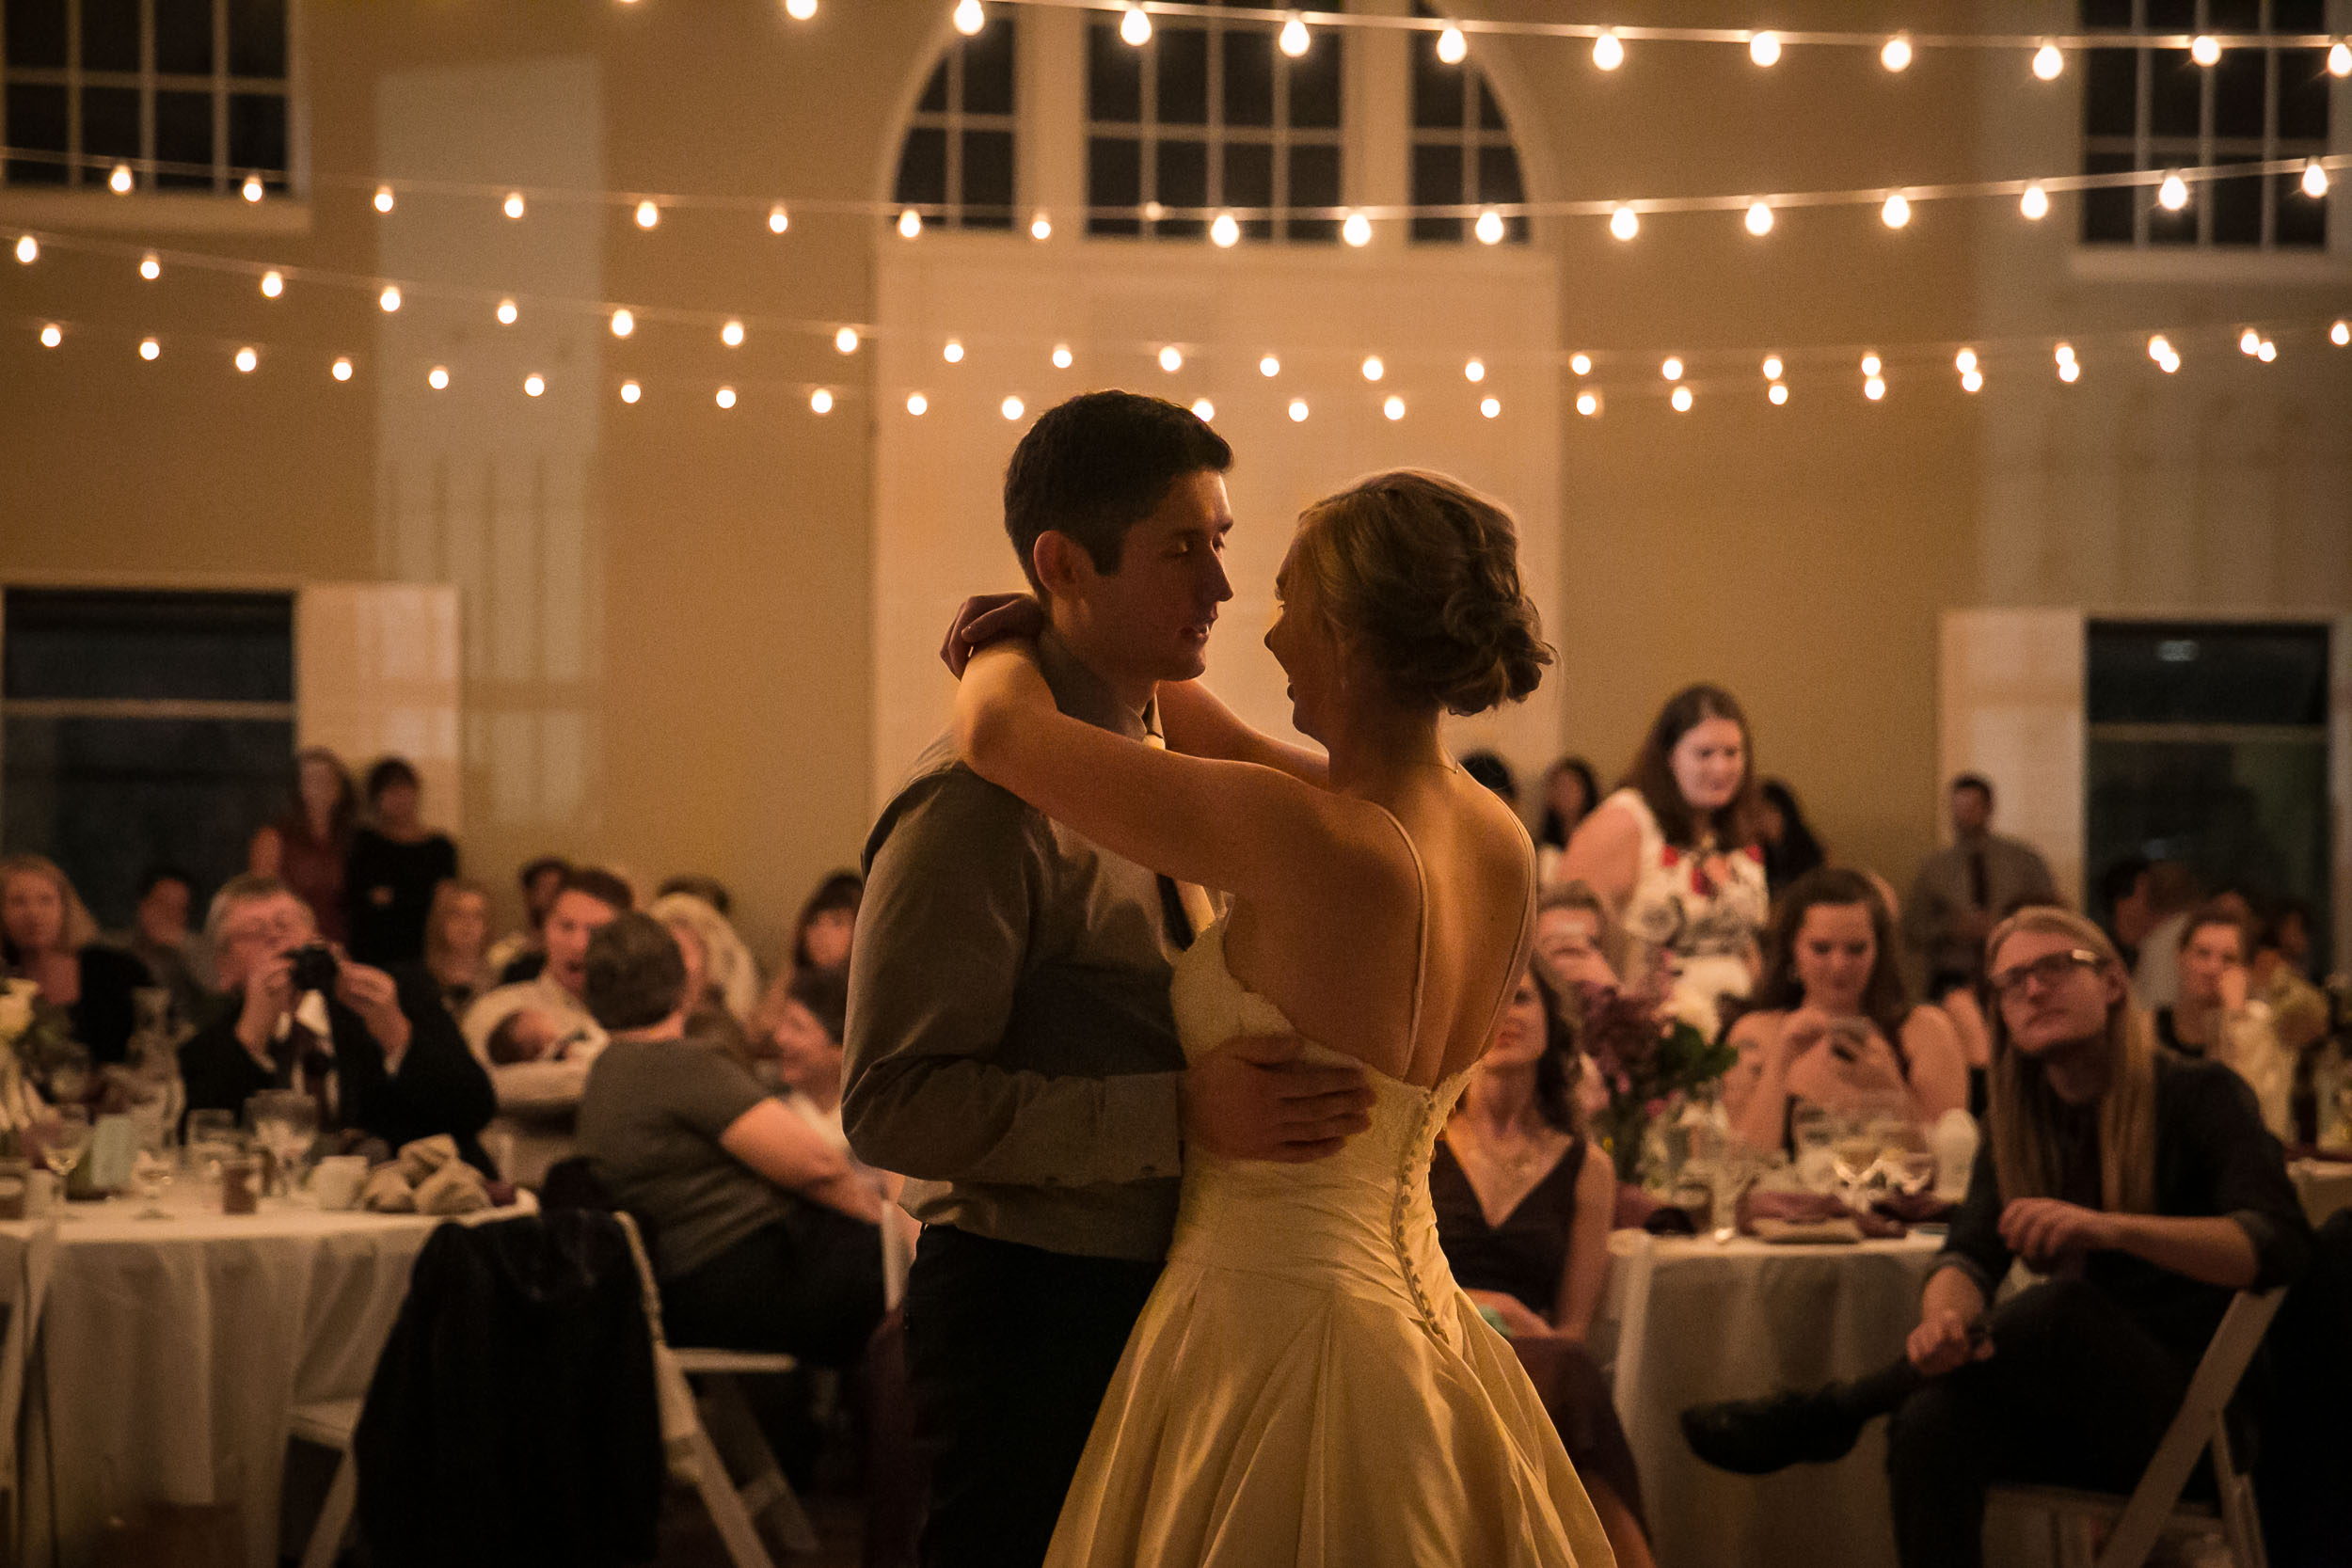 Intimate first dance with low lights | The Hall at Greenlake Wedding Reception Photo | By G. Lin Photography